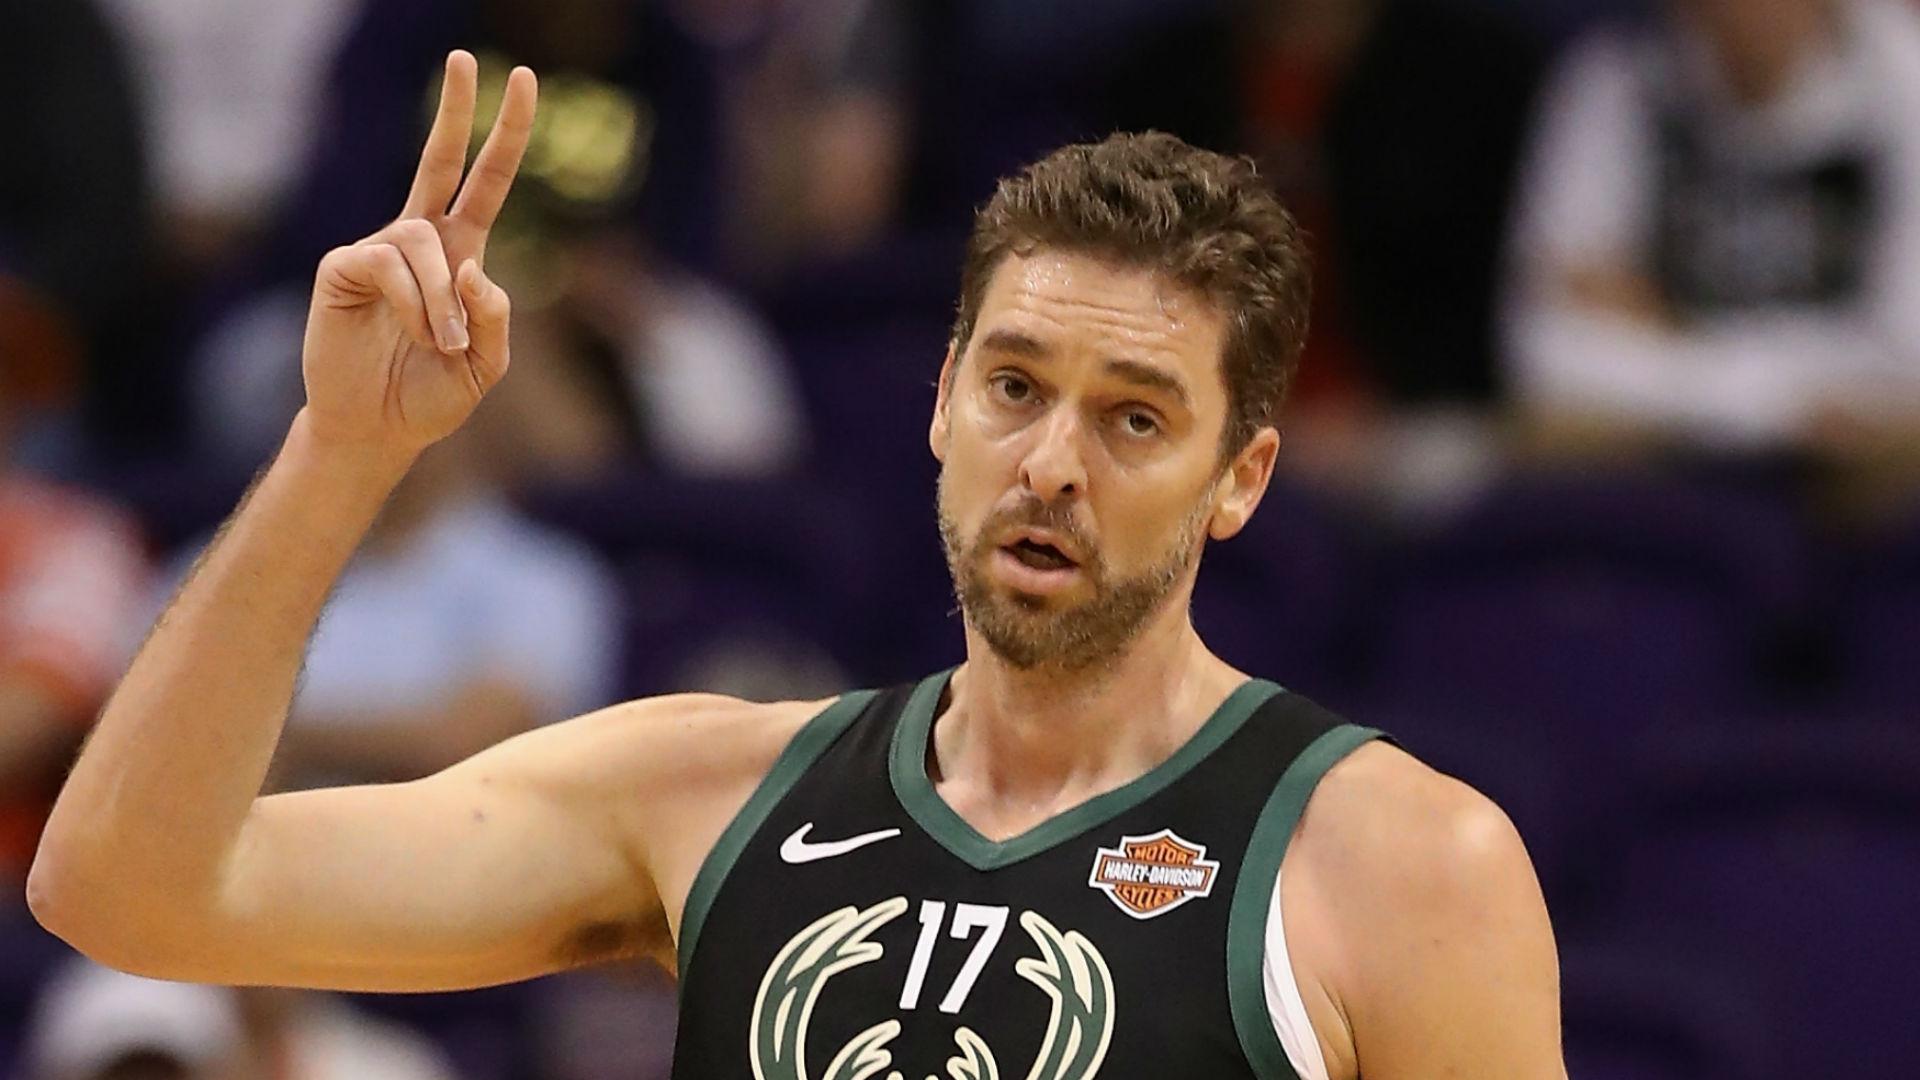 Report: Bucks' Gasol (ankle) could miss one month